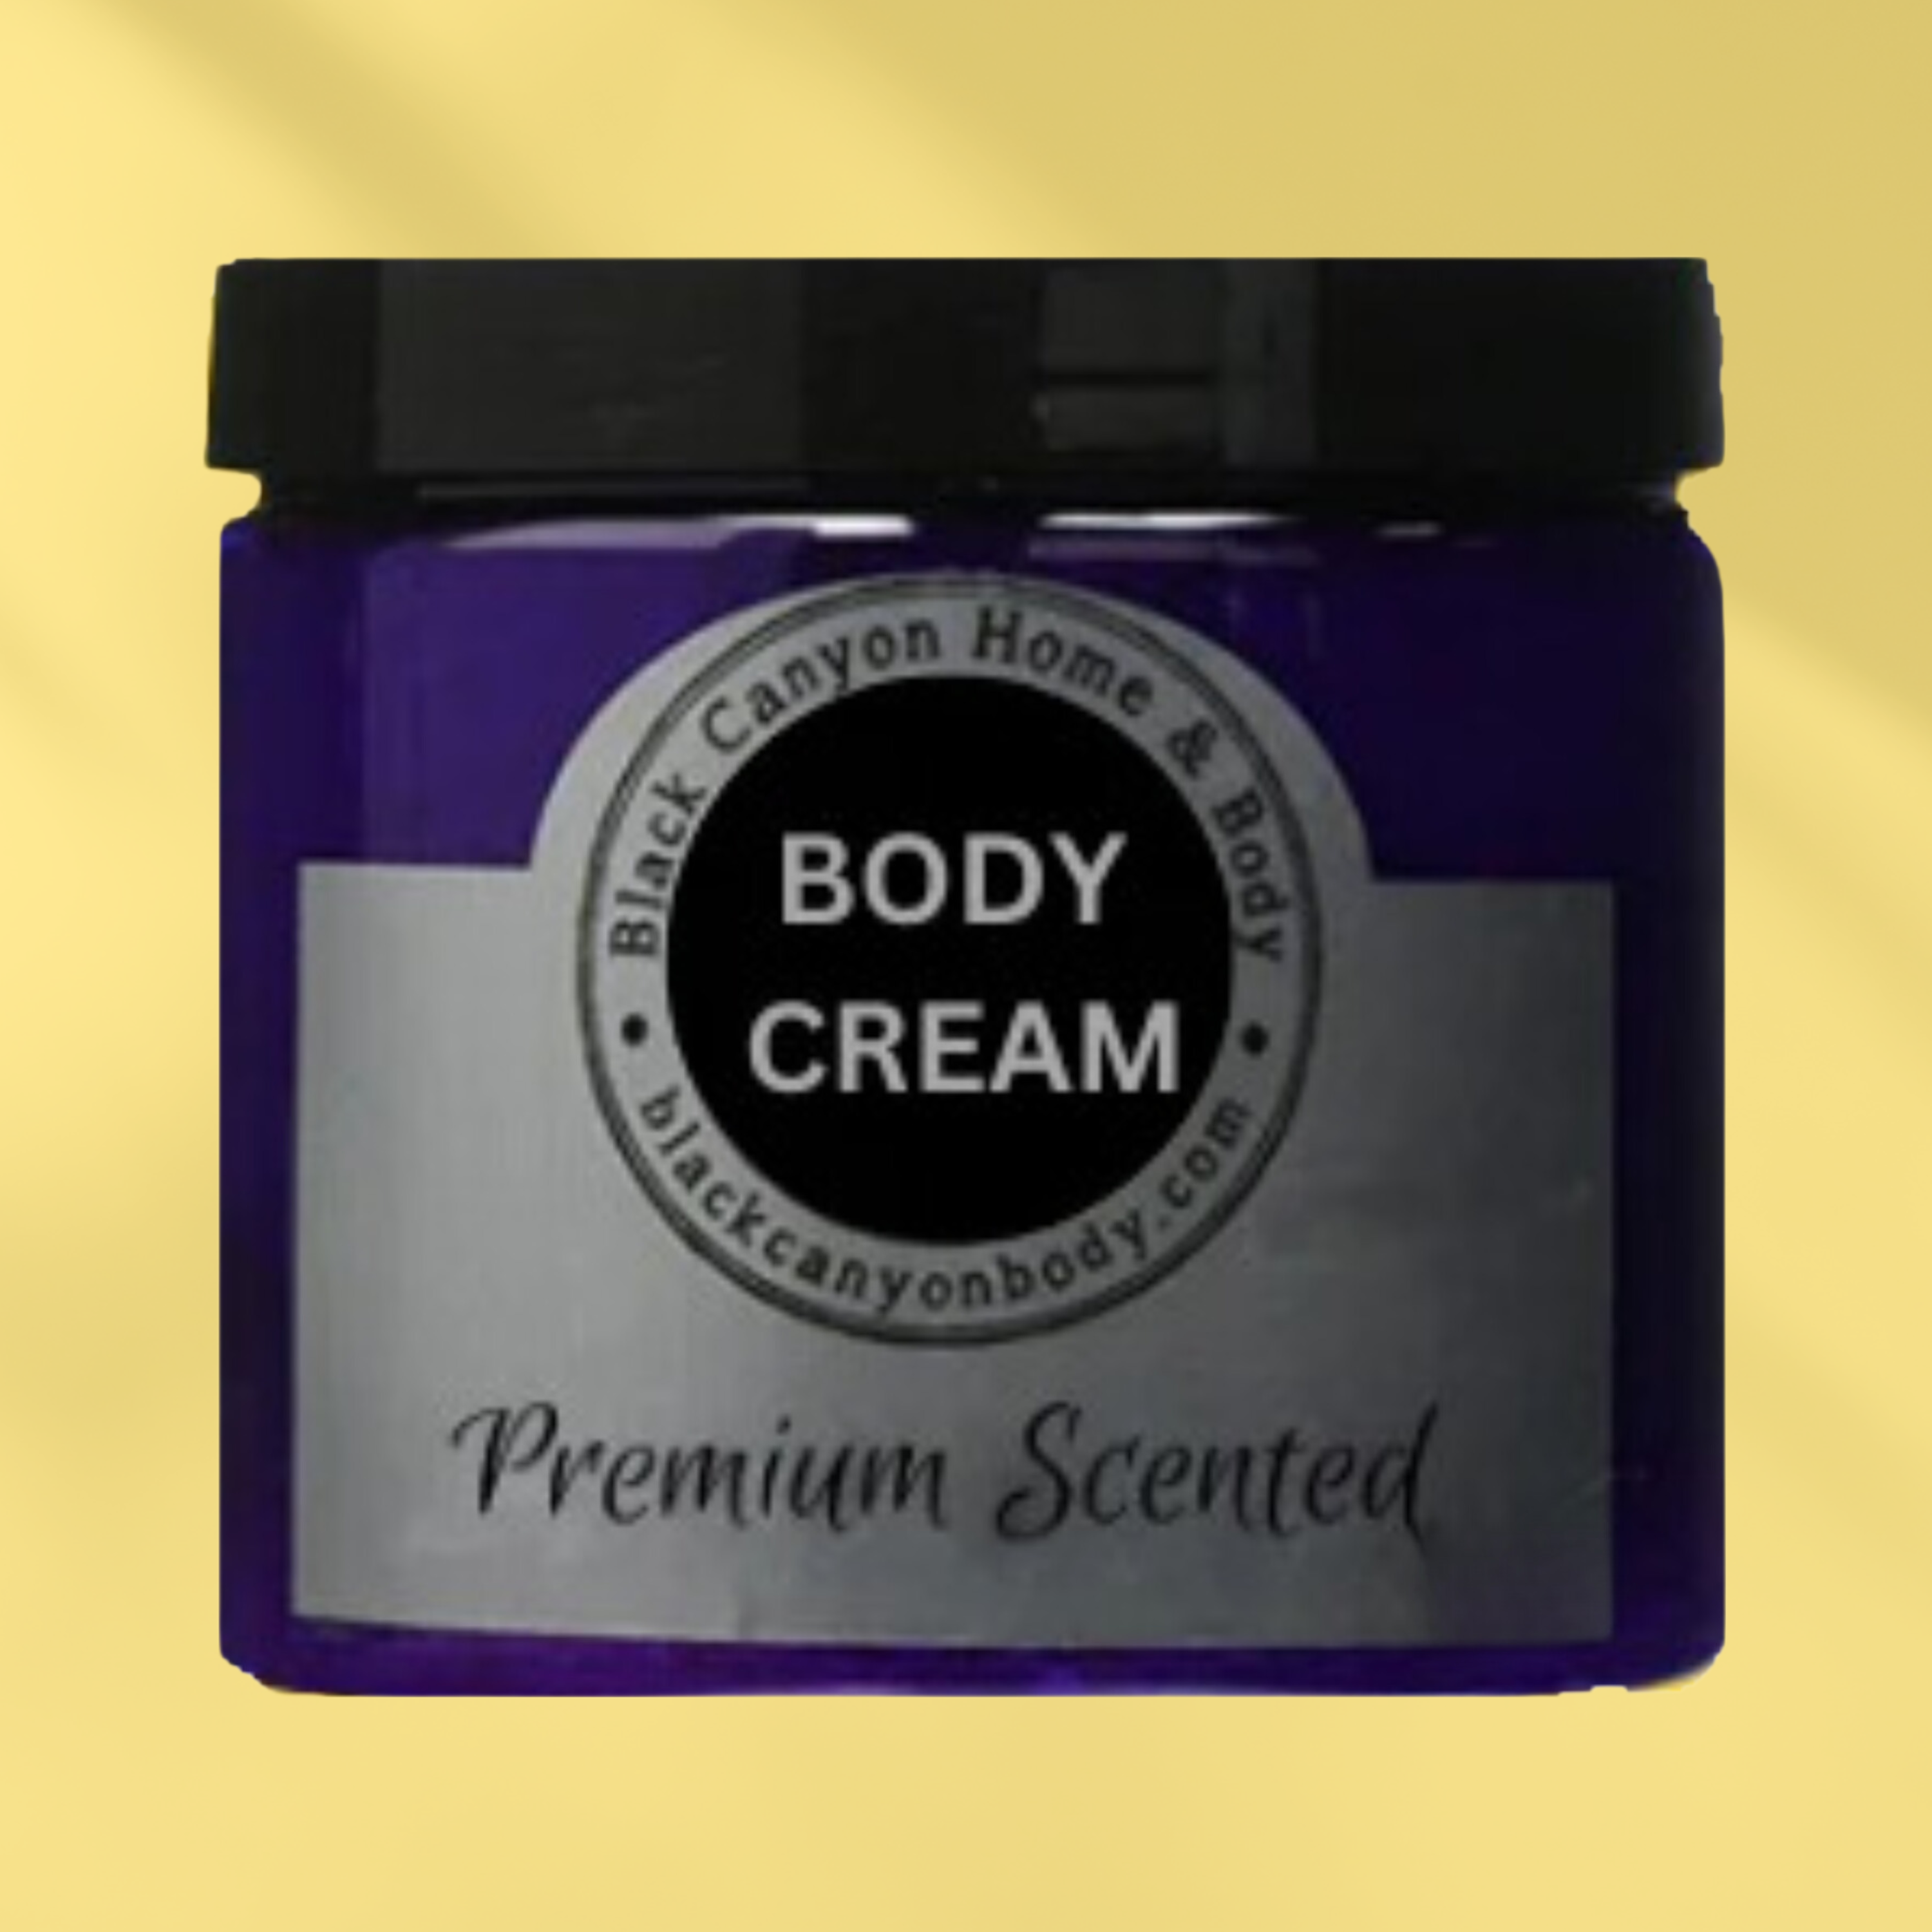 Black Canyon Butt Naked Scented Luxury Body Cream with Aloe